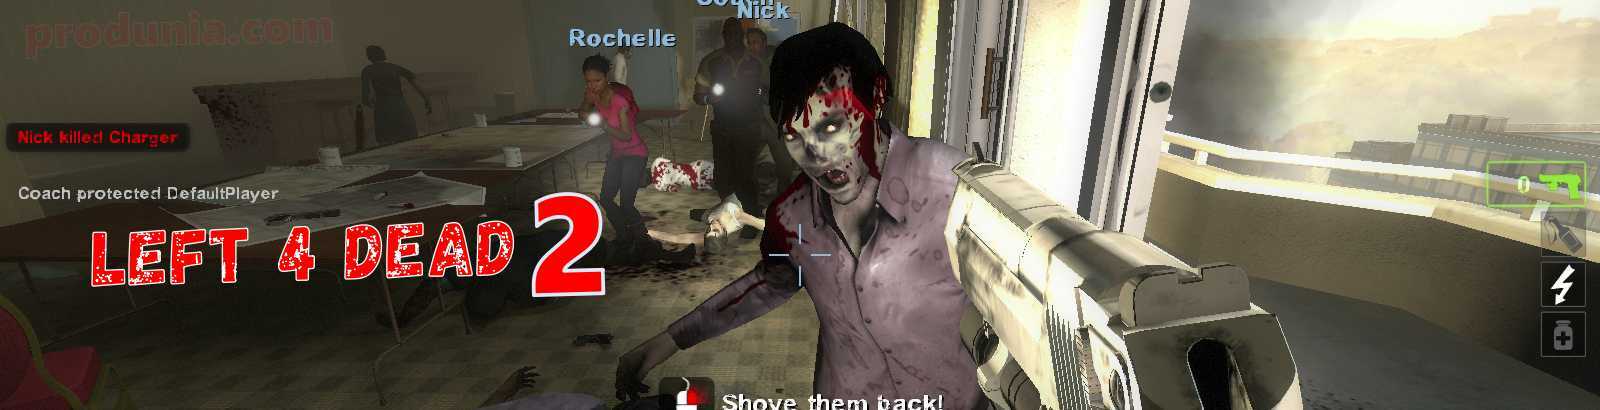 Download left 4 dead 2 highly compressed in parts